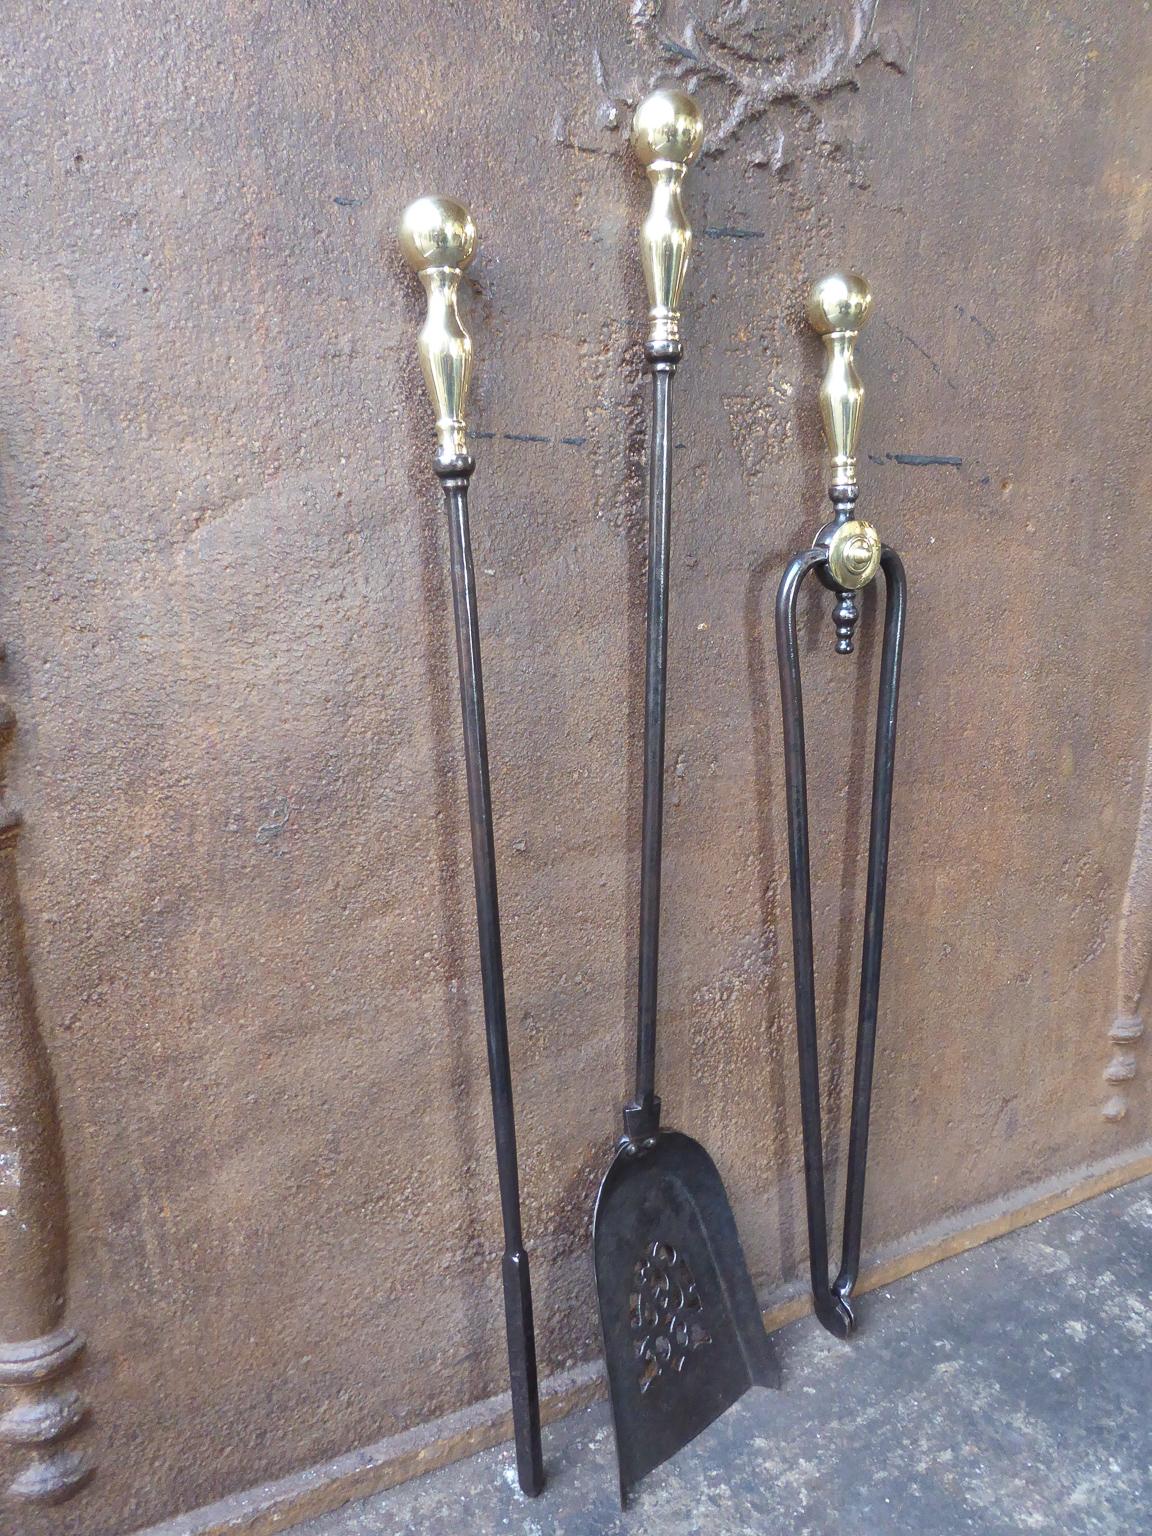 19th century English Victorian fire tool set. The set is made of wrought iron and polished brass. The set is in a good condition and is fully functional.

We have a unique and specialized collection of antique and used fireplace accessories